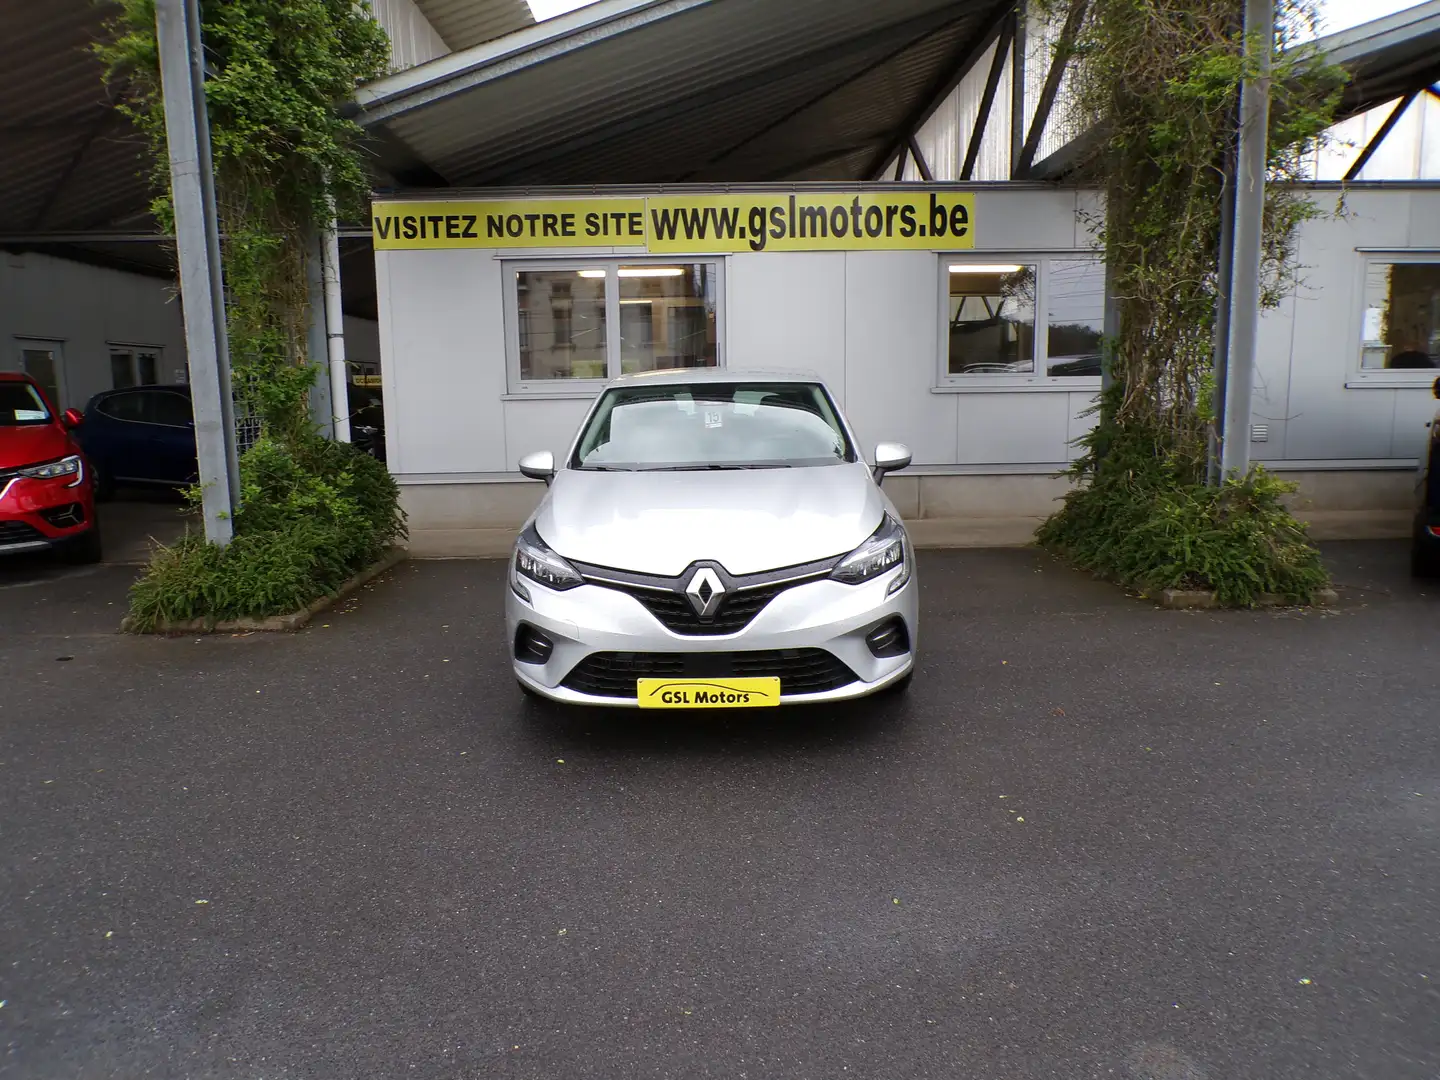 Renault Clio 1.0TCe 90 Gris 04/21 41250km Airco GPS Cruise USB Gris - 2